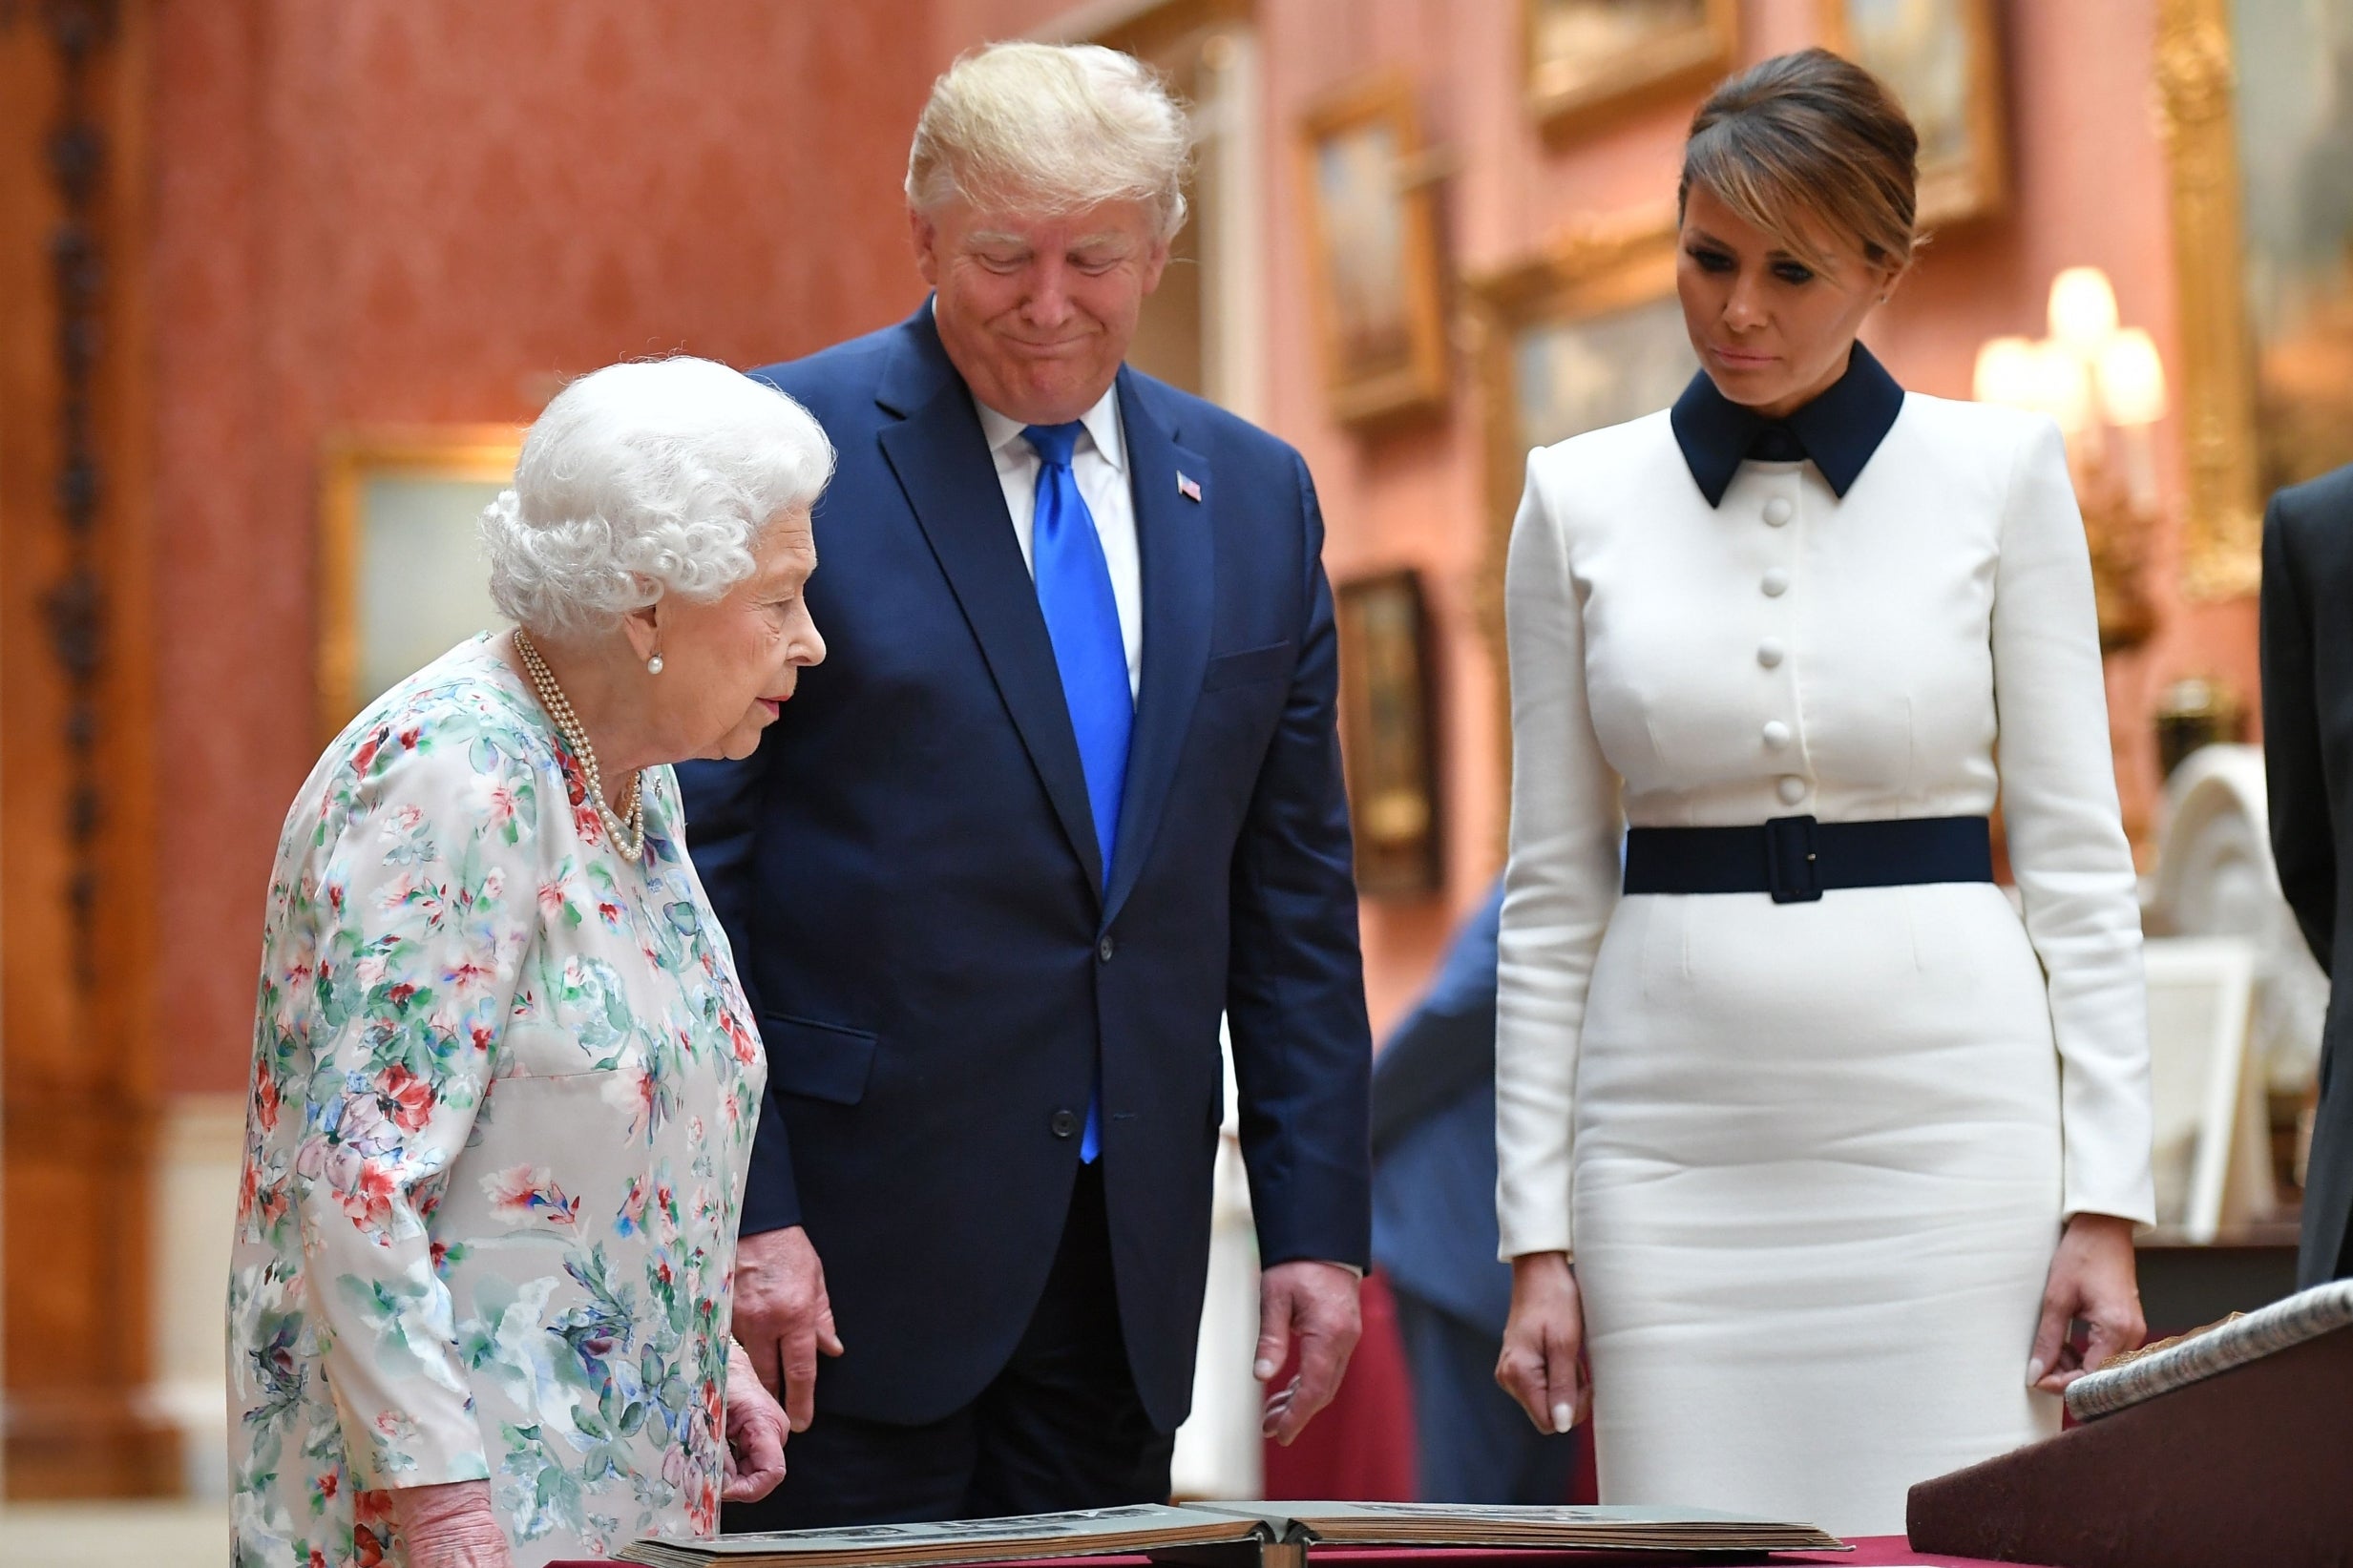 Britain's Queen Elizabeth II welcomes US President Donald Trump and US First Lady Melania Trump at Buckingham Palace on the opening day of a three day state visit to Britain, London, June 3, 2019.